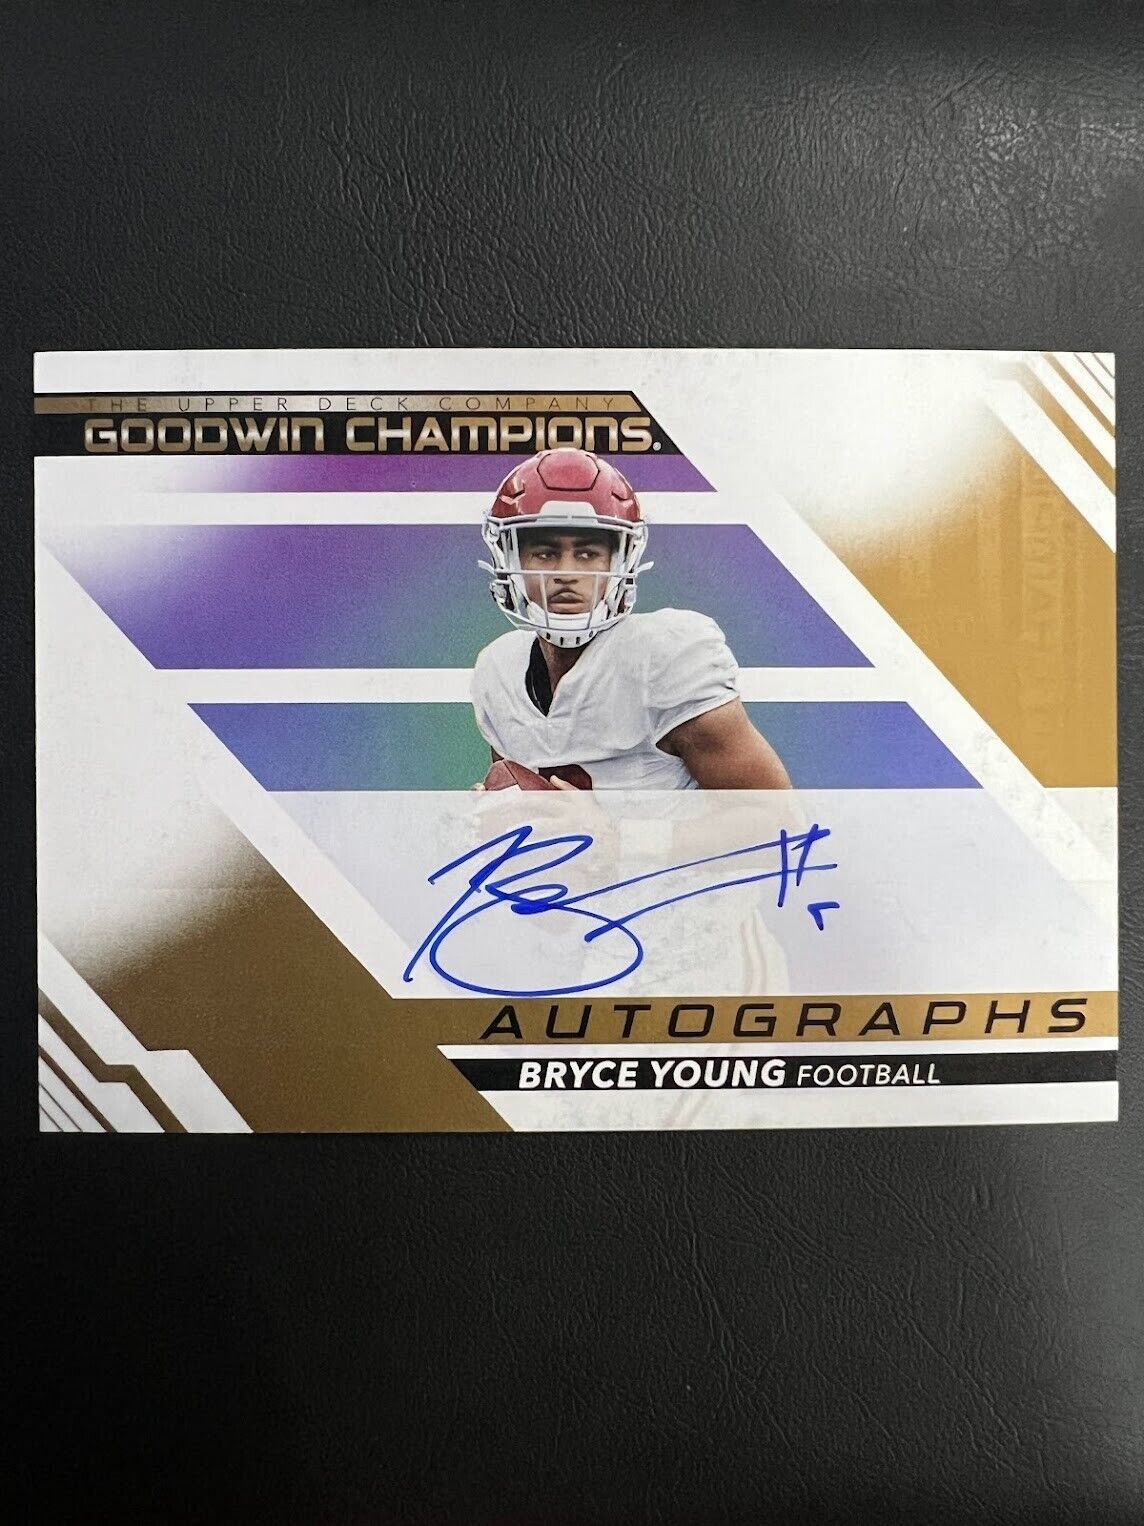 2022 Upper Deck Goodwin Champions Bryce Young ON CARD Auto #HA-BY J